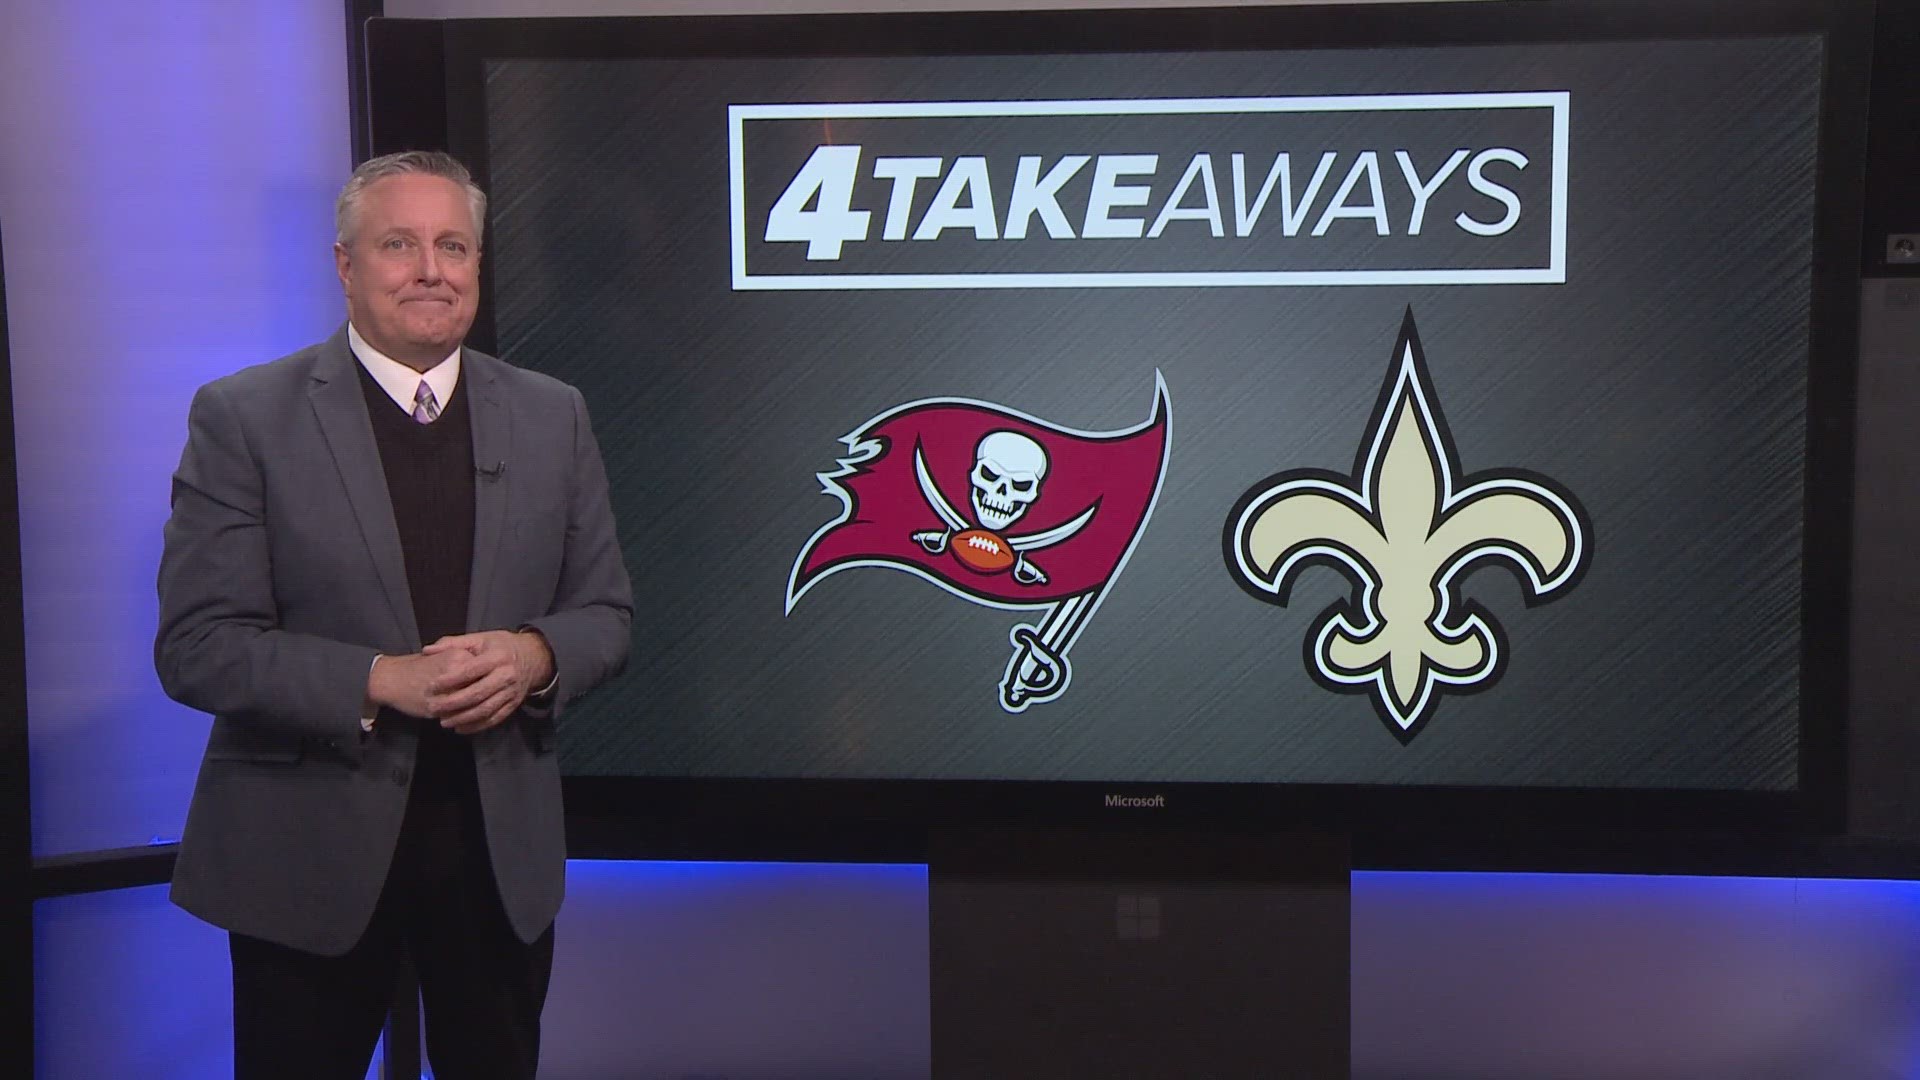 WWL Louisiana sports director Doug Mouton shares his 'Four Takeaways' from the Saints' Week 17 win over the Buccaneers to keep New Orleans' post-season hopes alive.